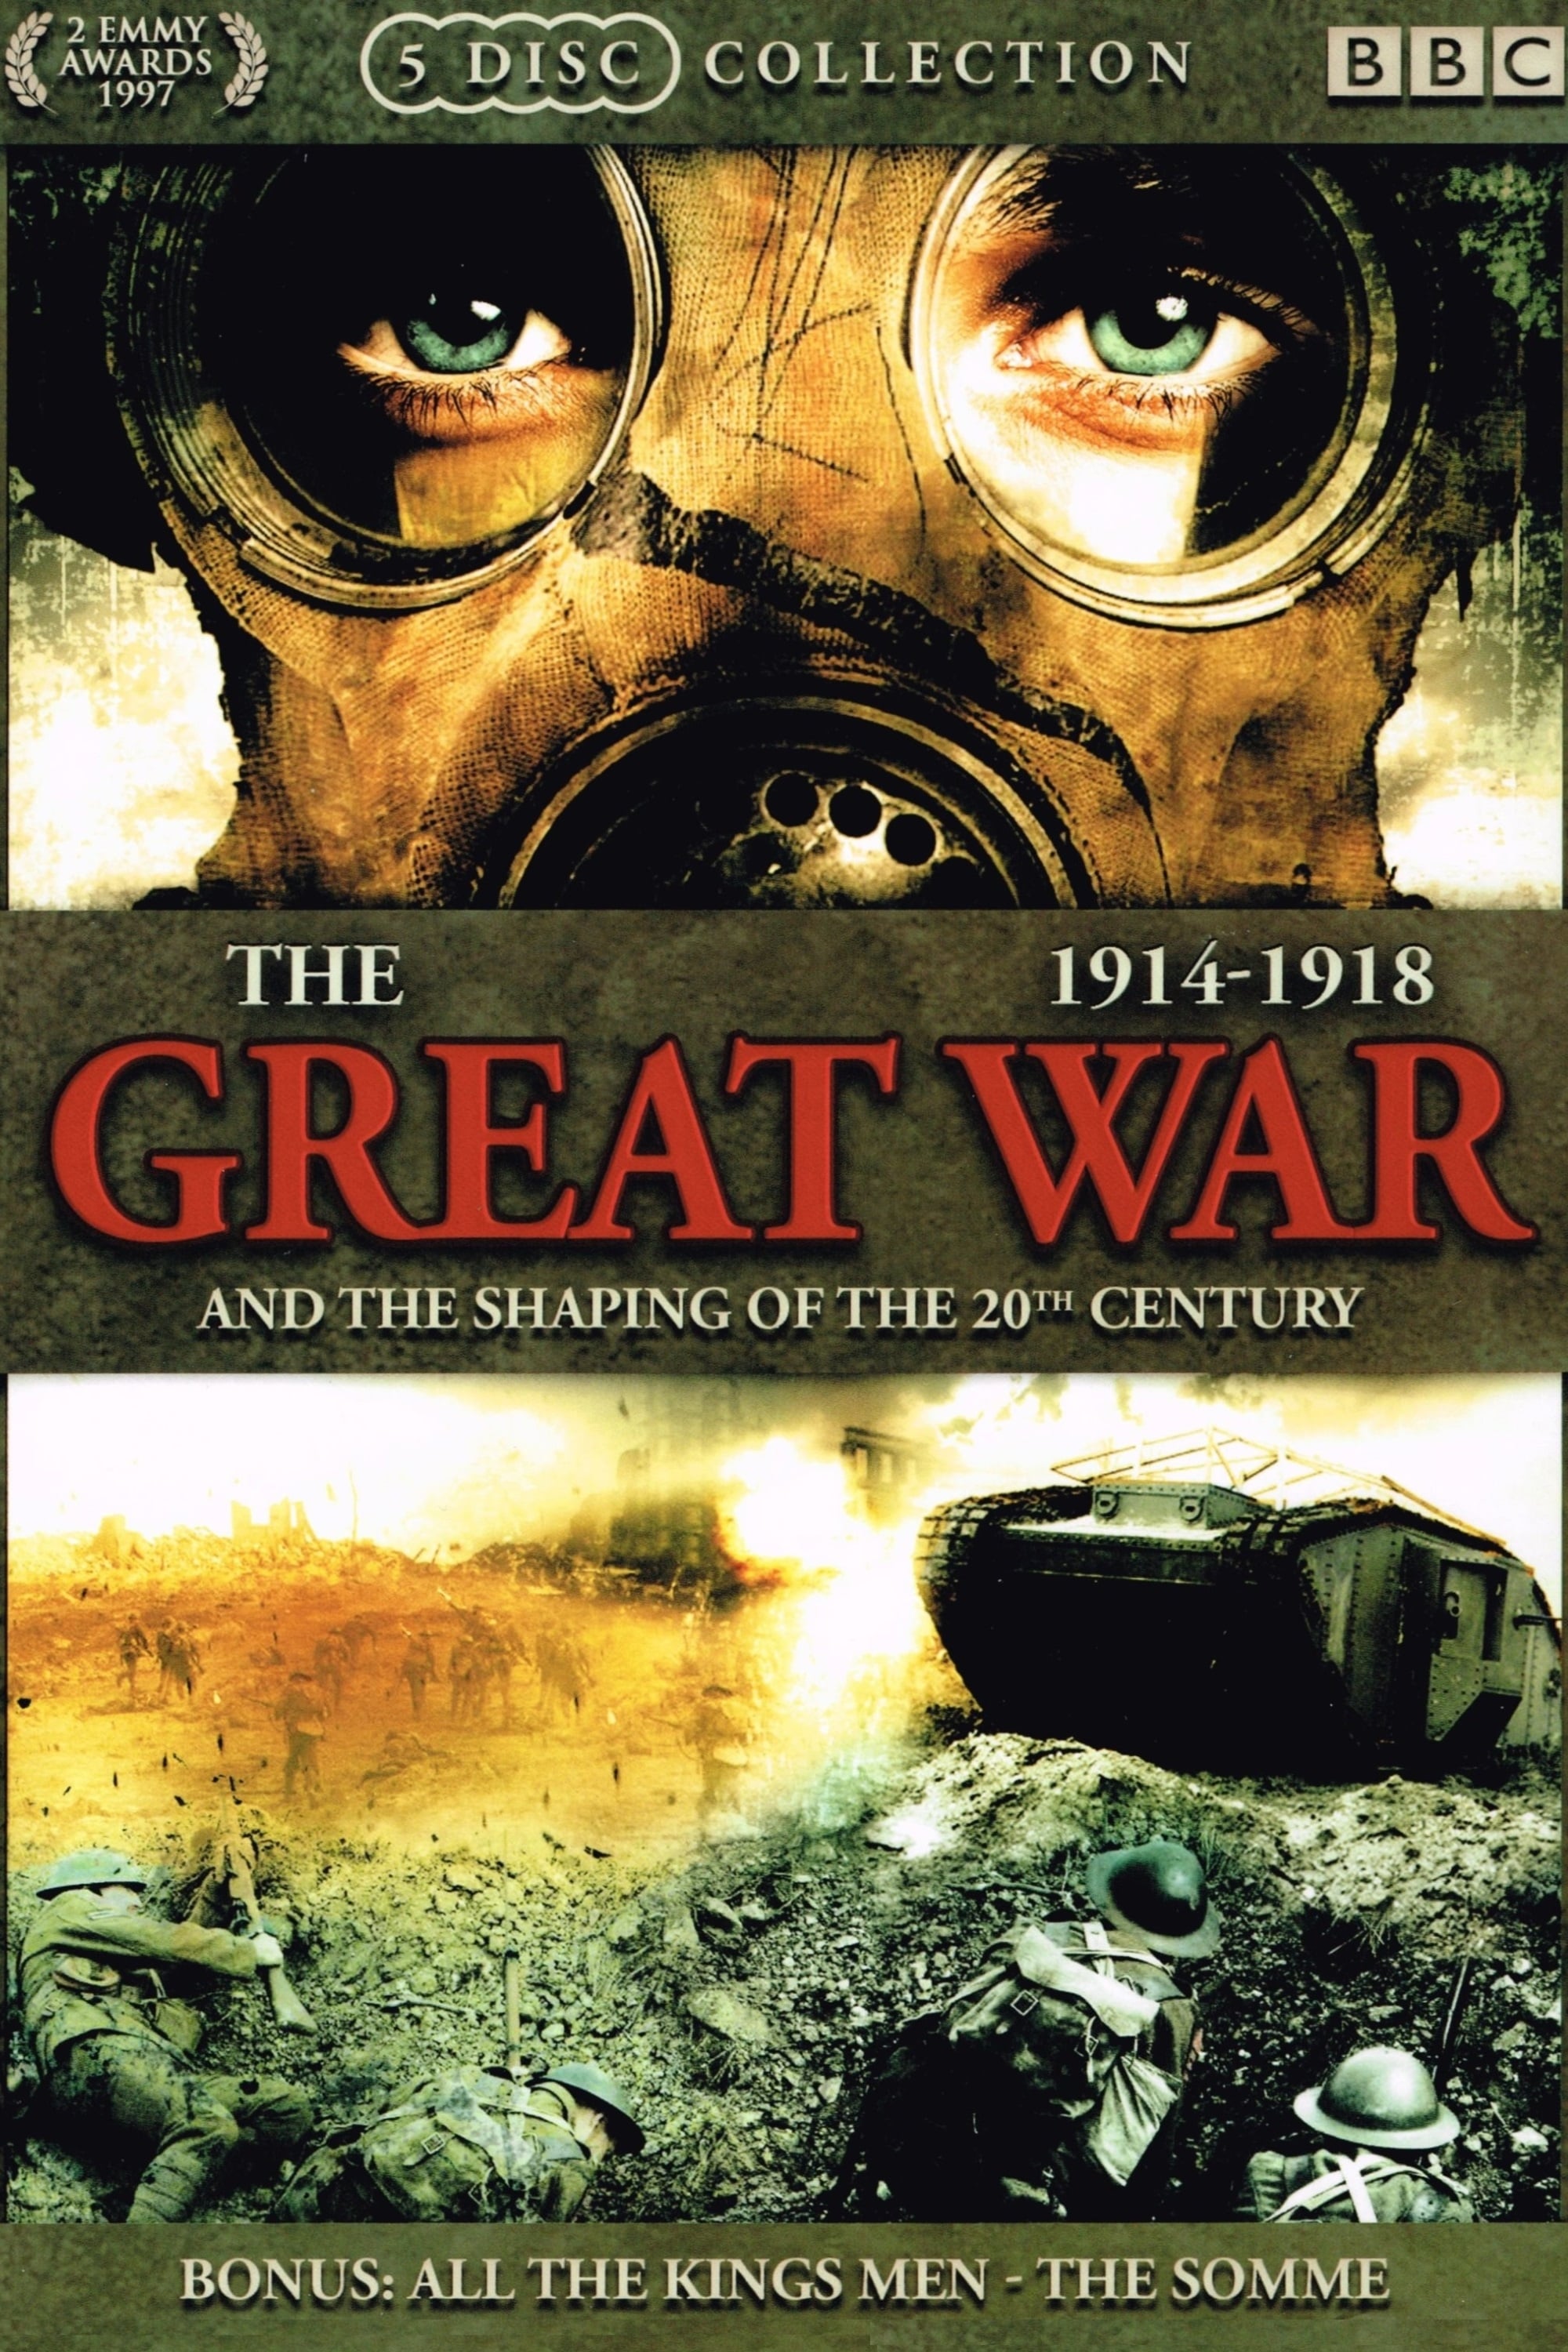 The Great War and the Shaping of the 20th Century (1996)